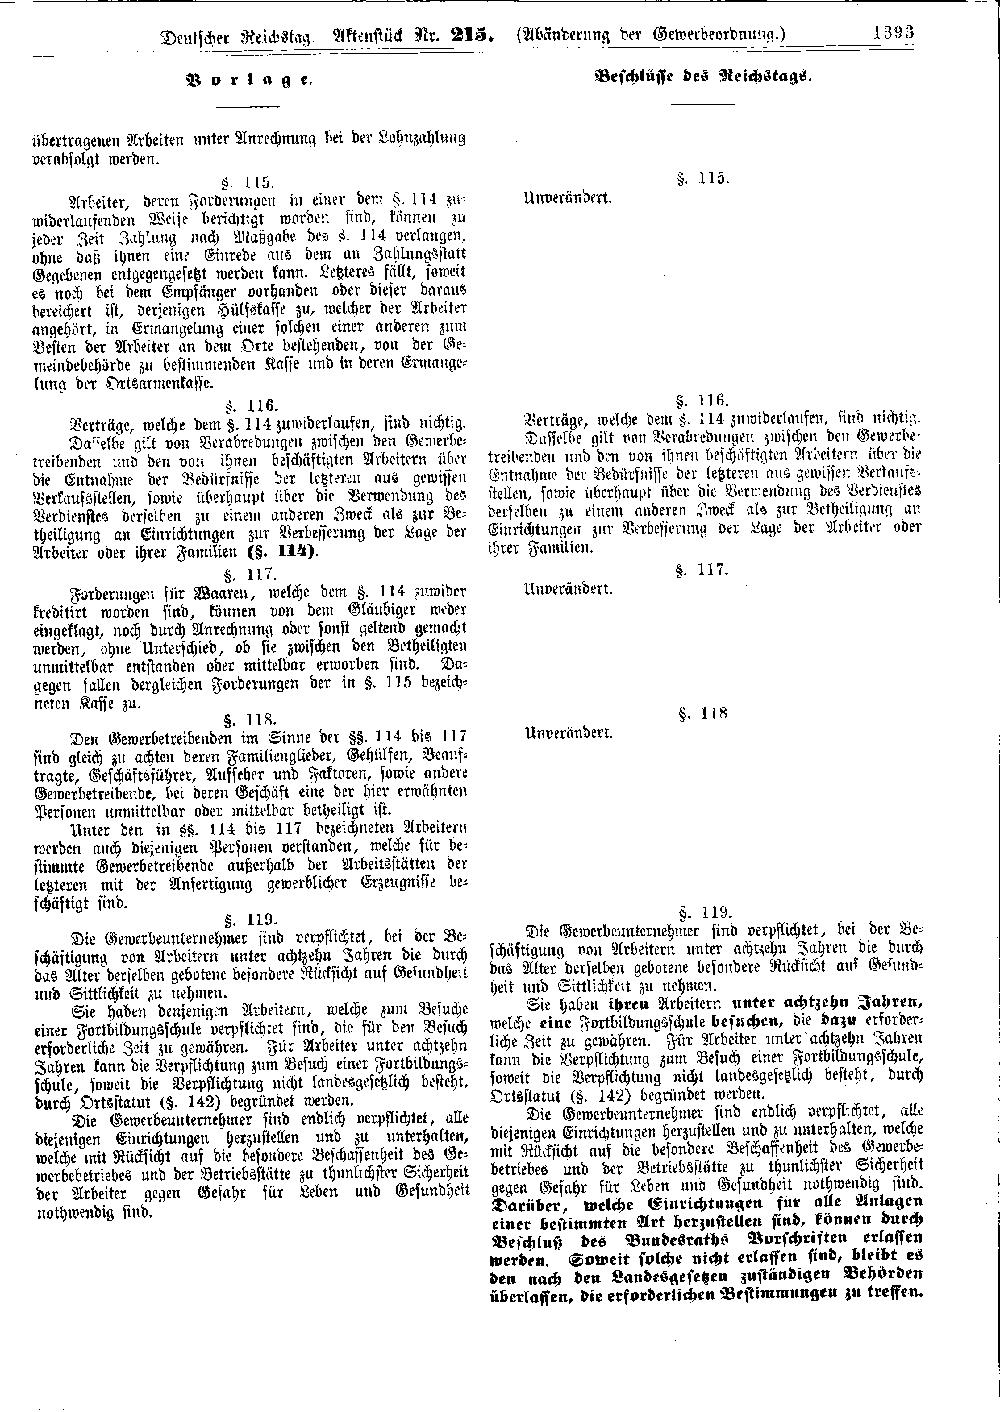 Scan of page 1393